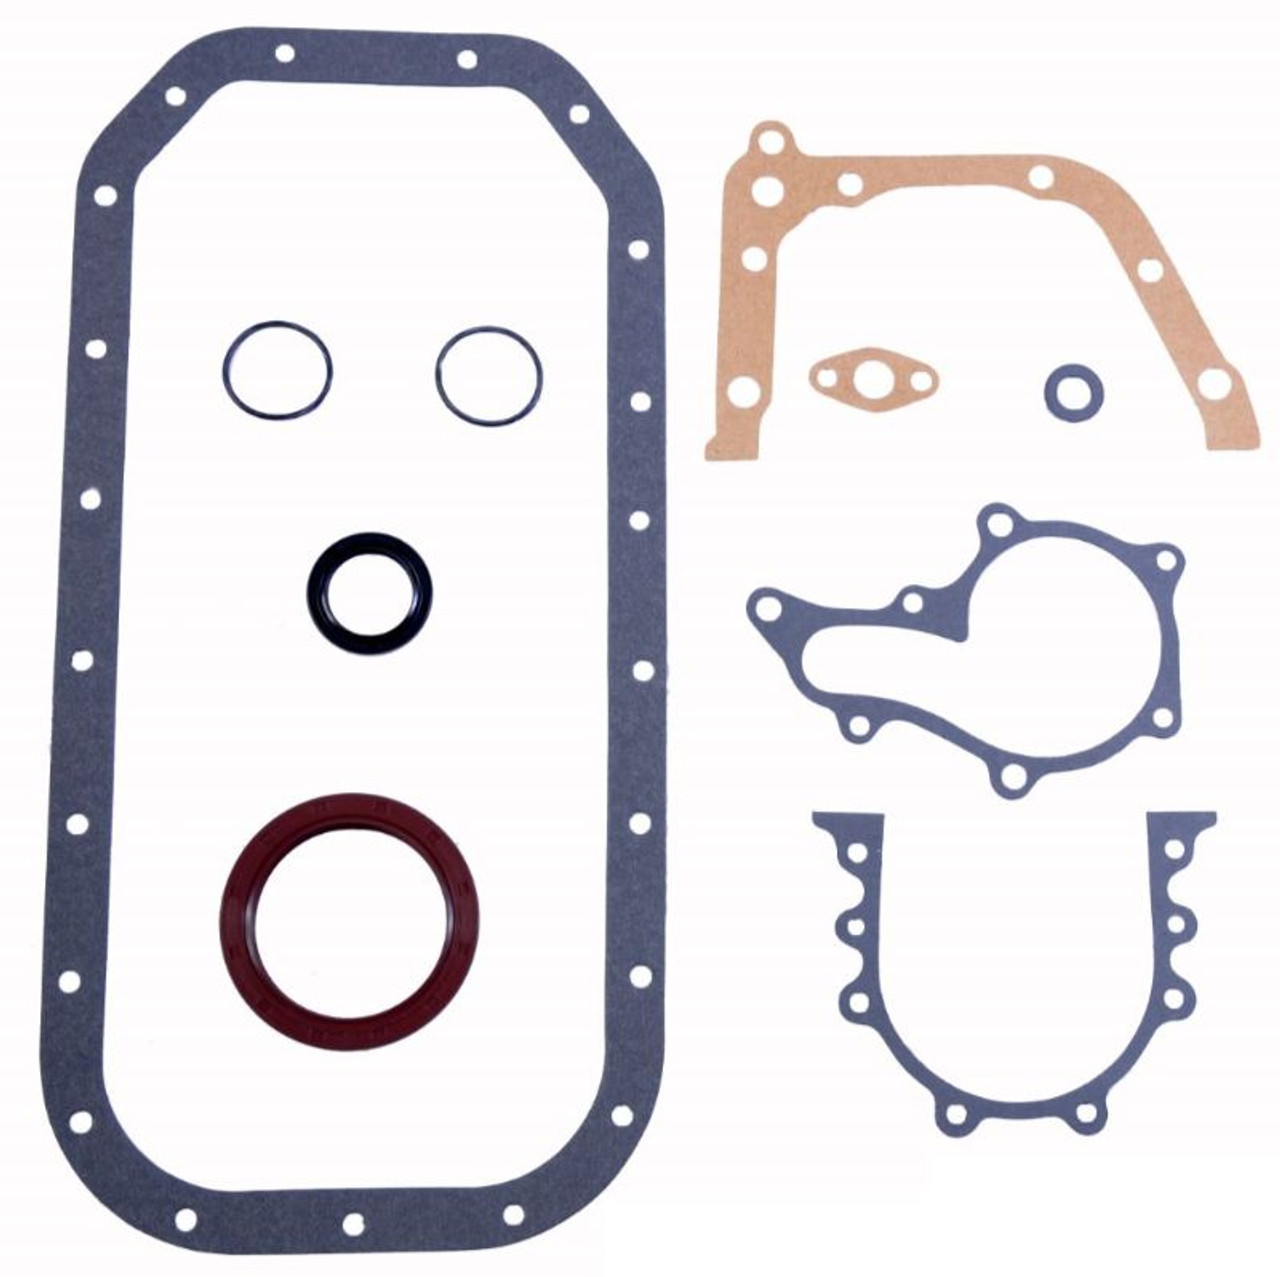 1987 Toyota Corolla 1.6L Engine Lower Gasket Set TO1.6CS-A -6